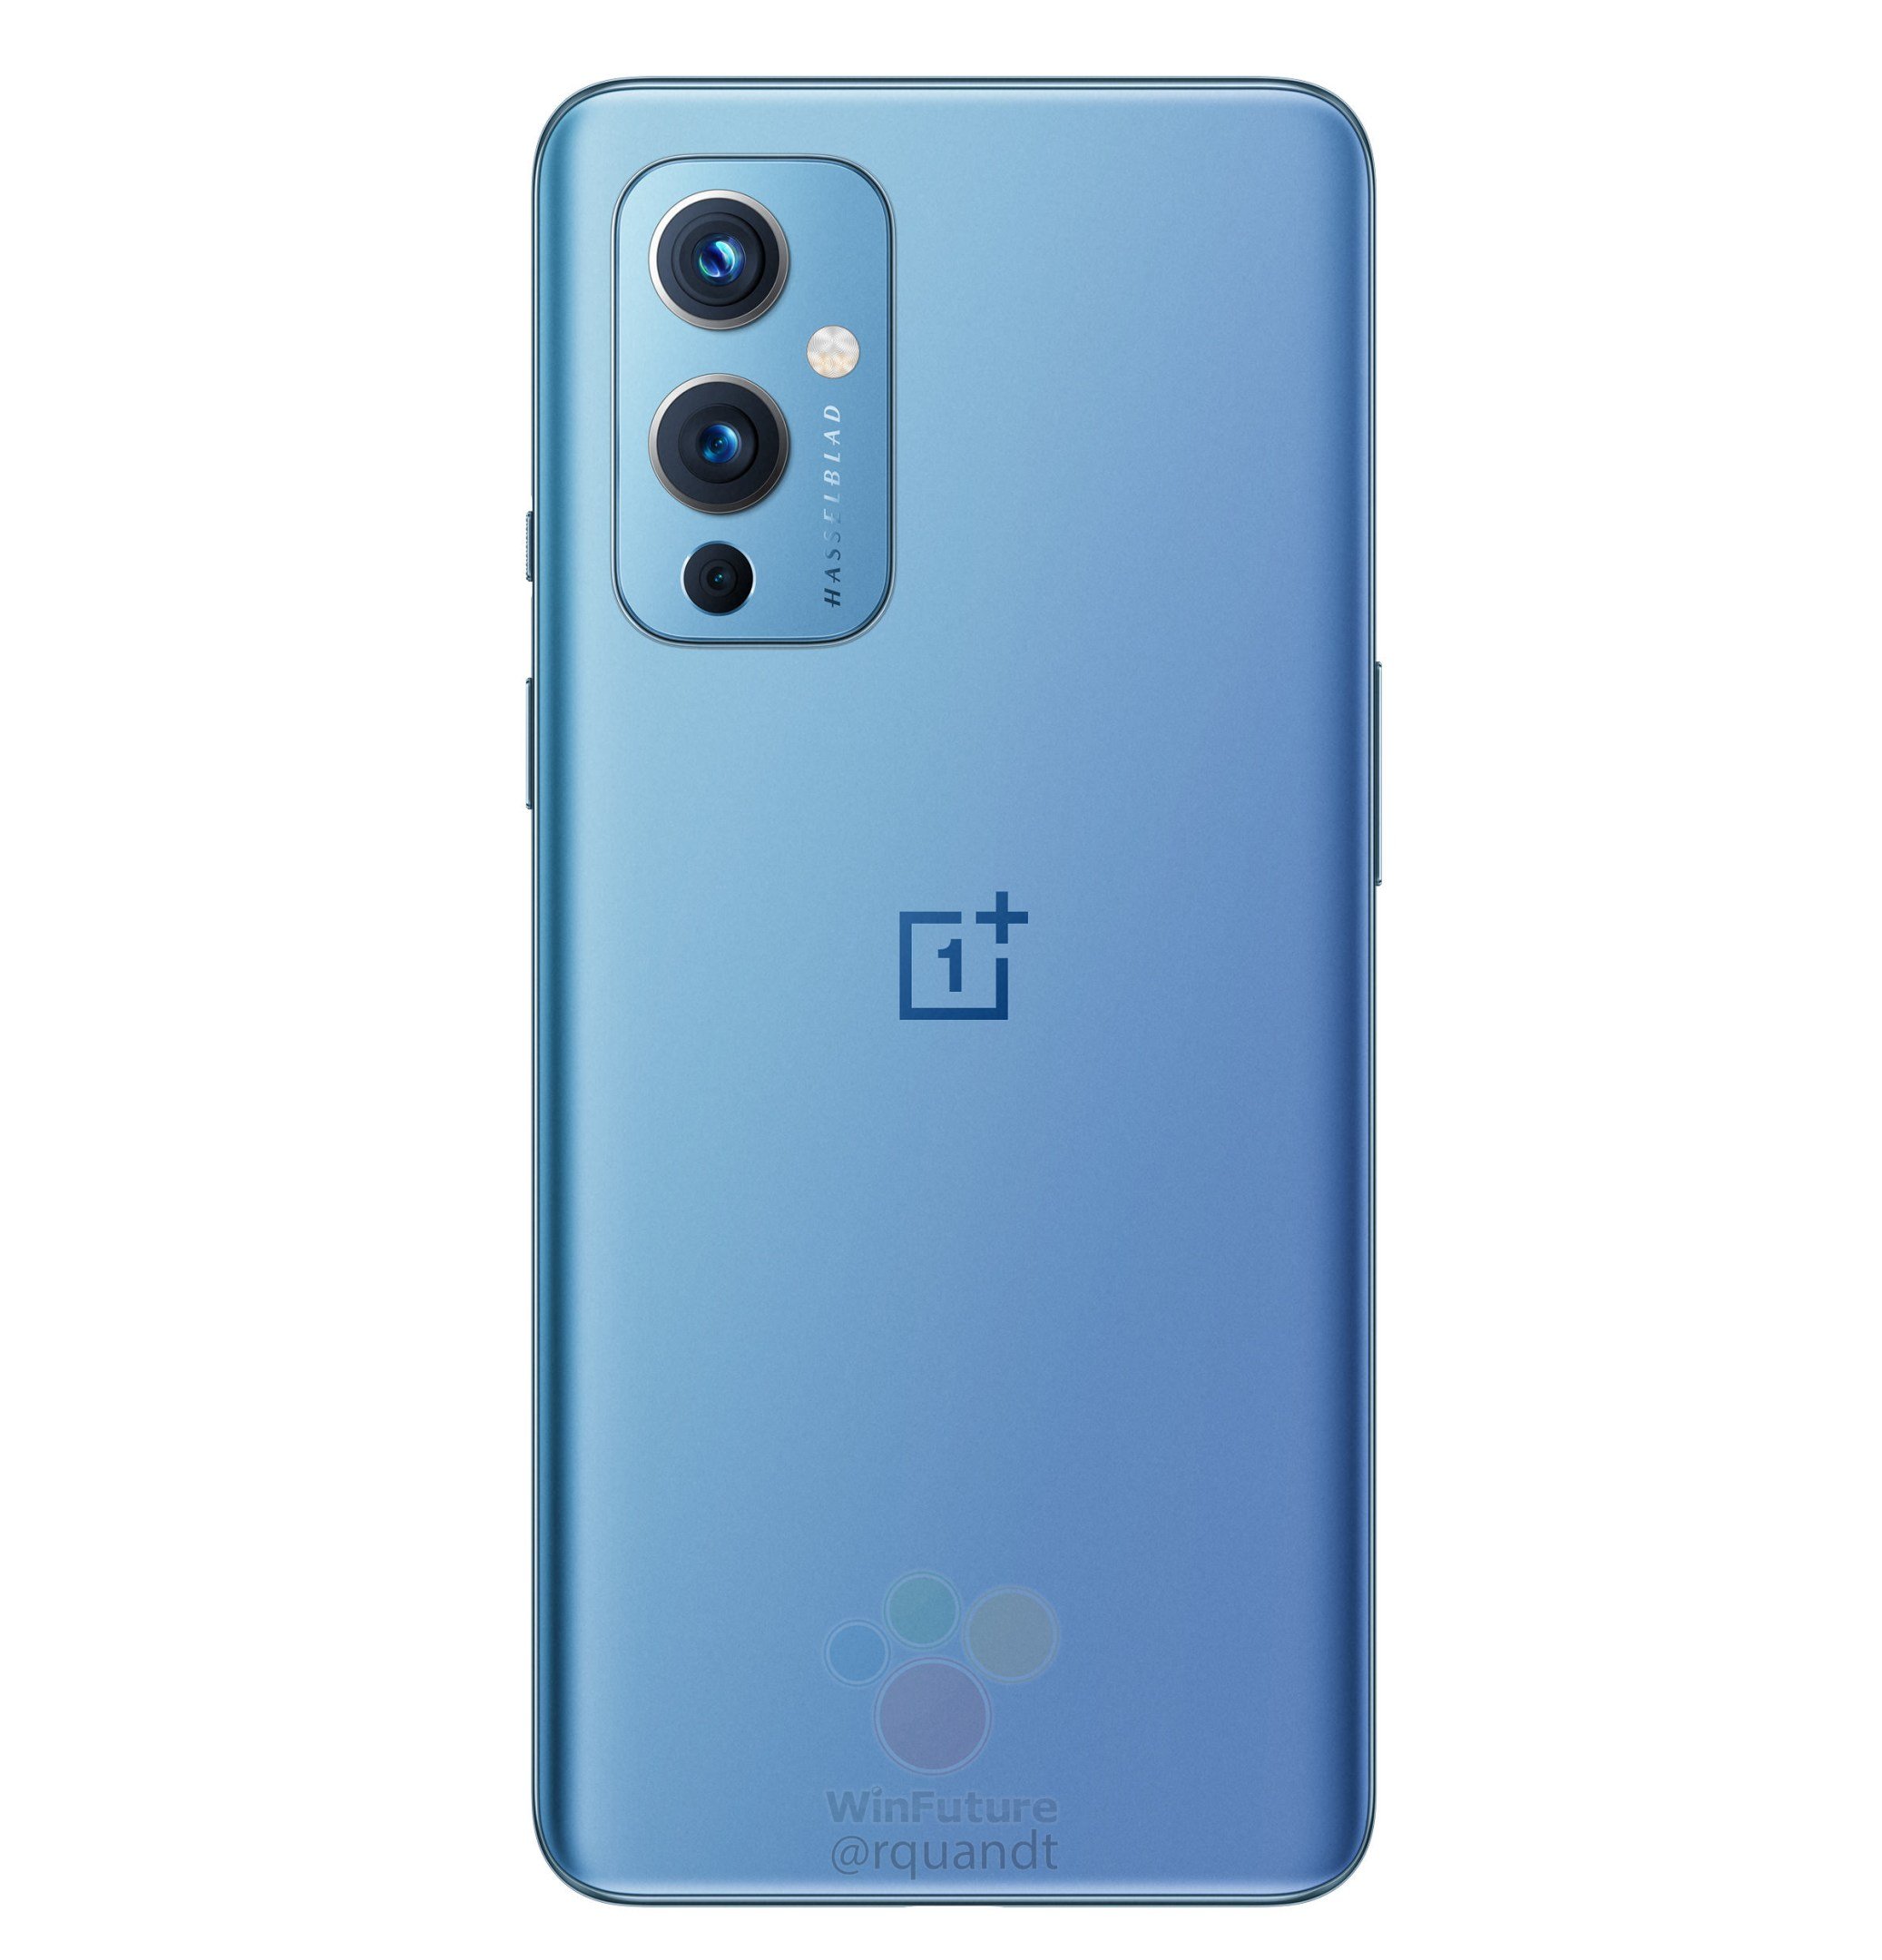 Official renders of the OnePlus 9 and OnePlus 9 Pro leaked ahead of launch